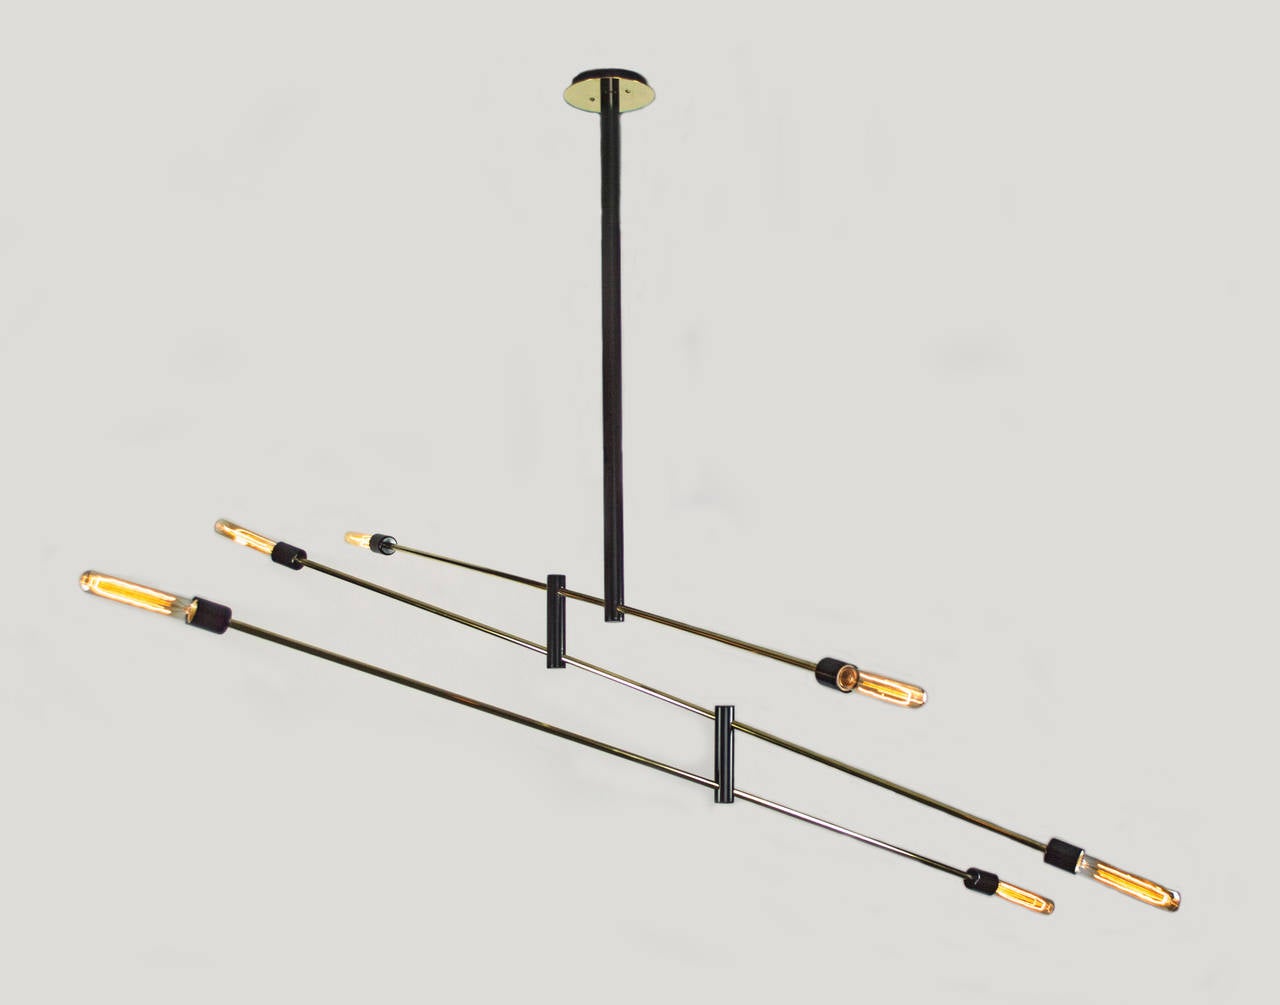 Simplicity at its finest. This distinctive chandelier is a dynamic presence in any room. The light is articulated which allows it to be moved like a mobile to create various Silhouettes. The black enameled frame with its brass tubing and canopy